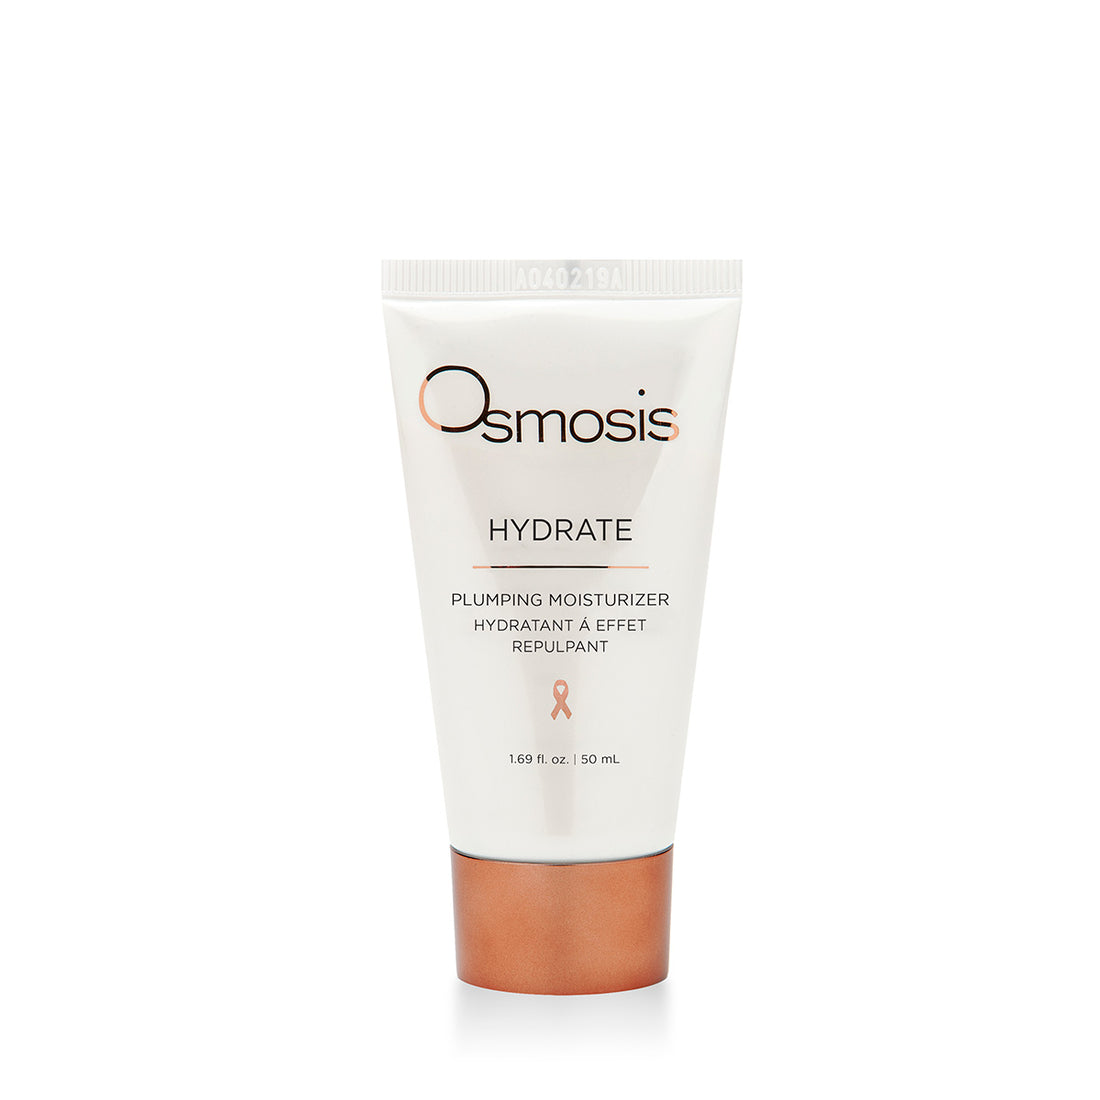 Osmosis Skincare Hydrate Plumping Moisturizer not only is a powerful hydrator but reduces the appearance of aging.